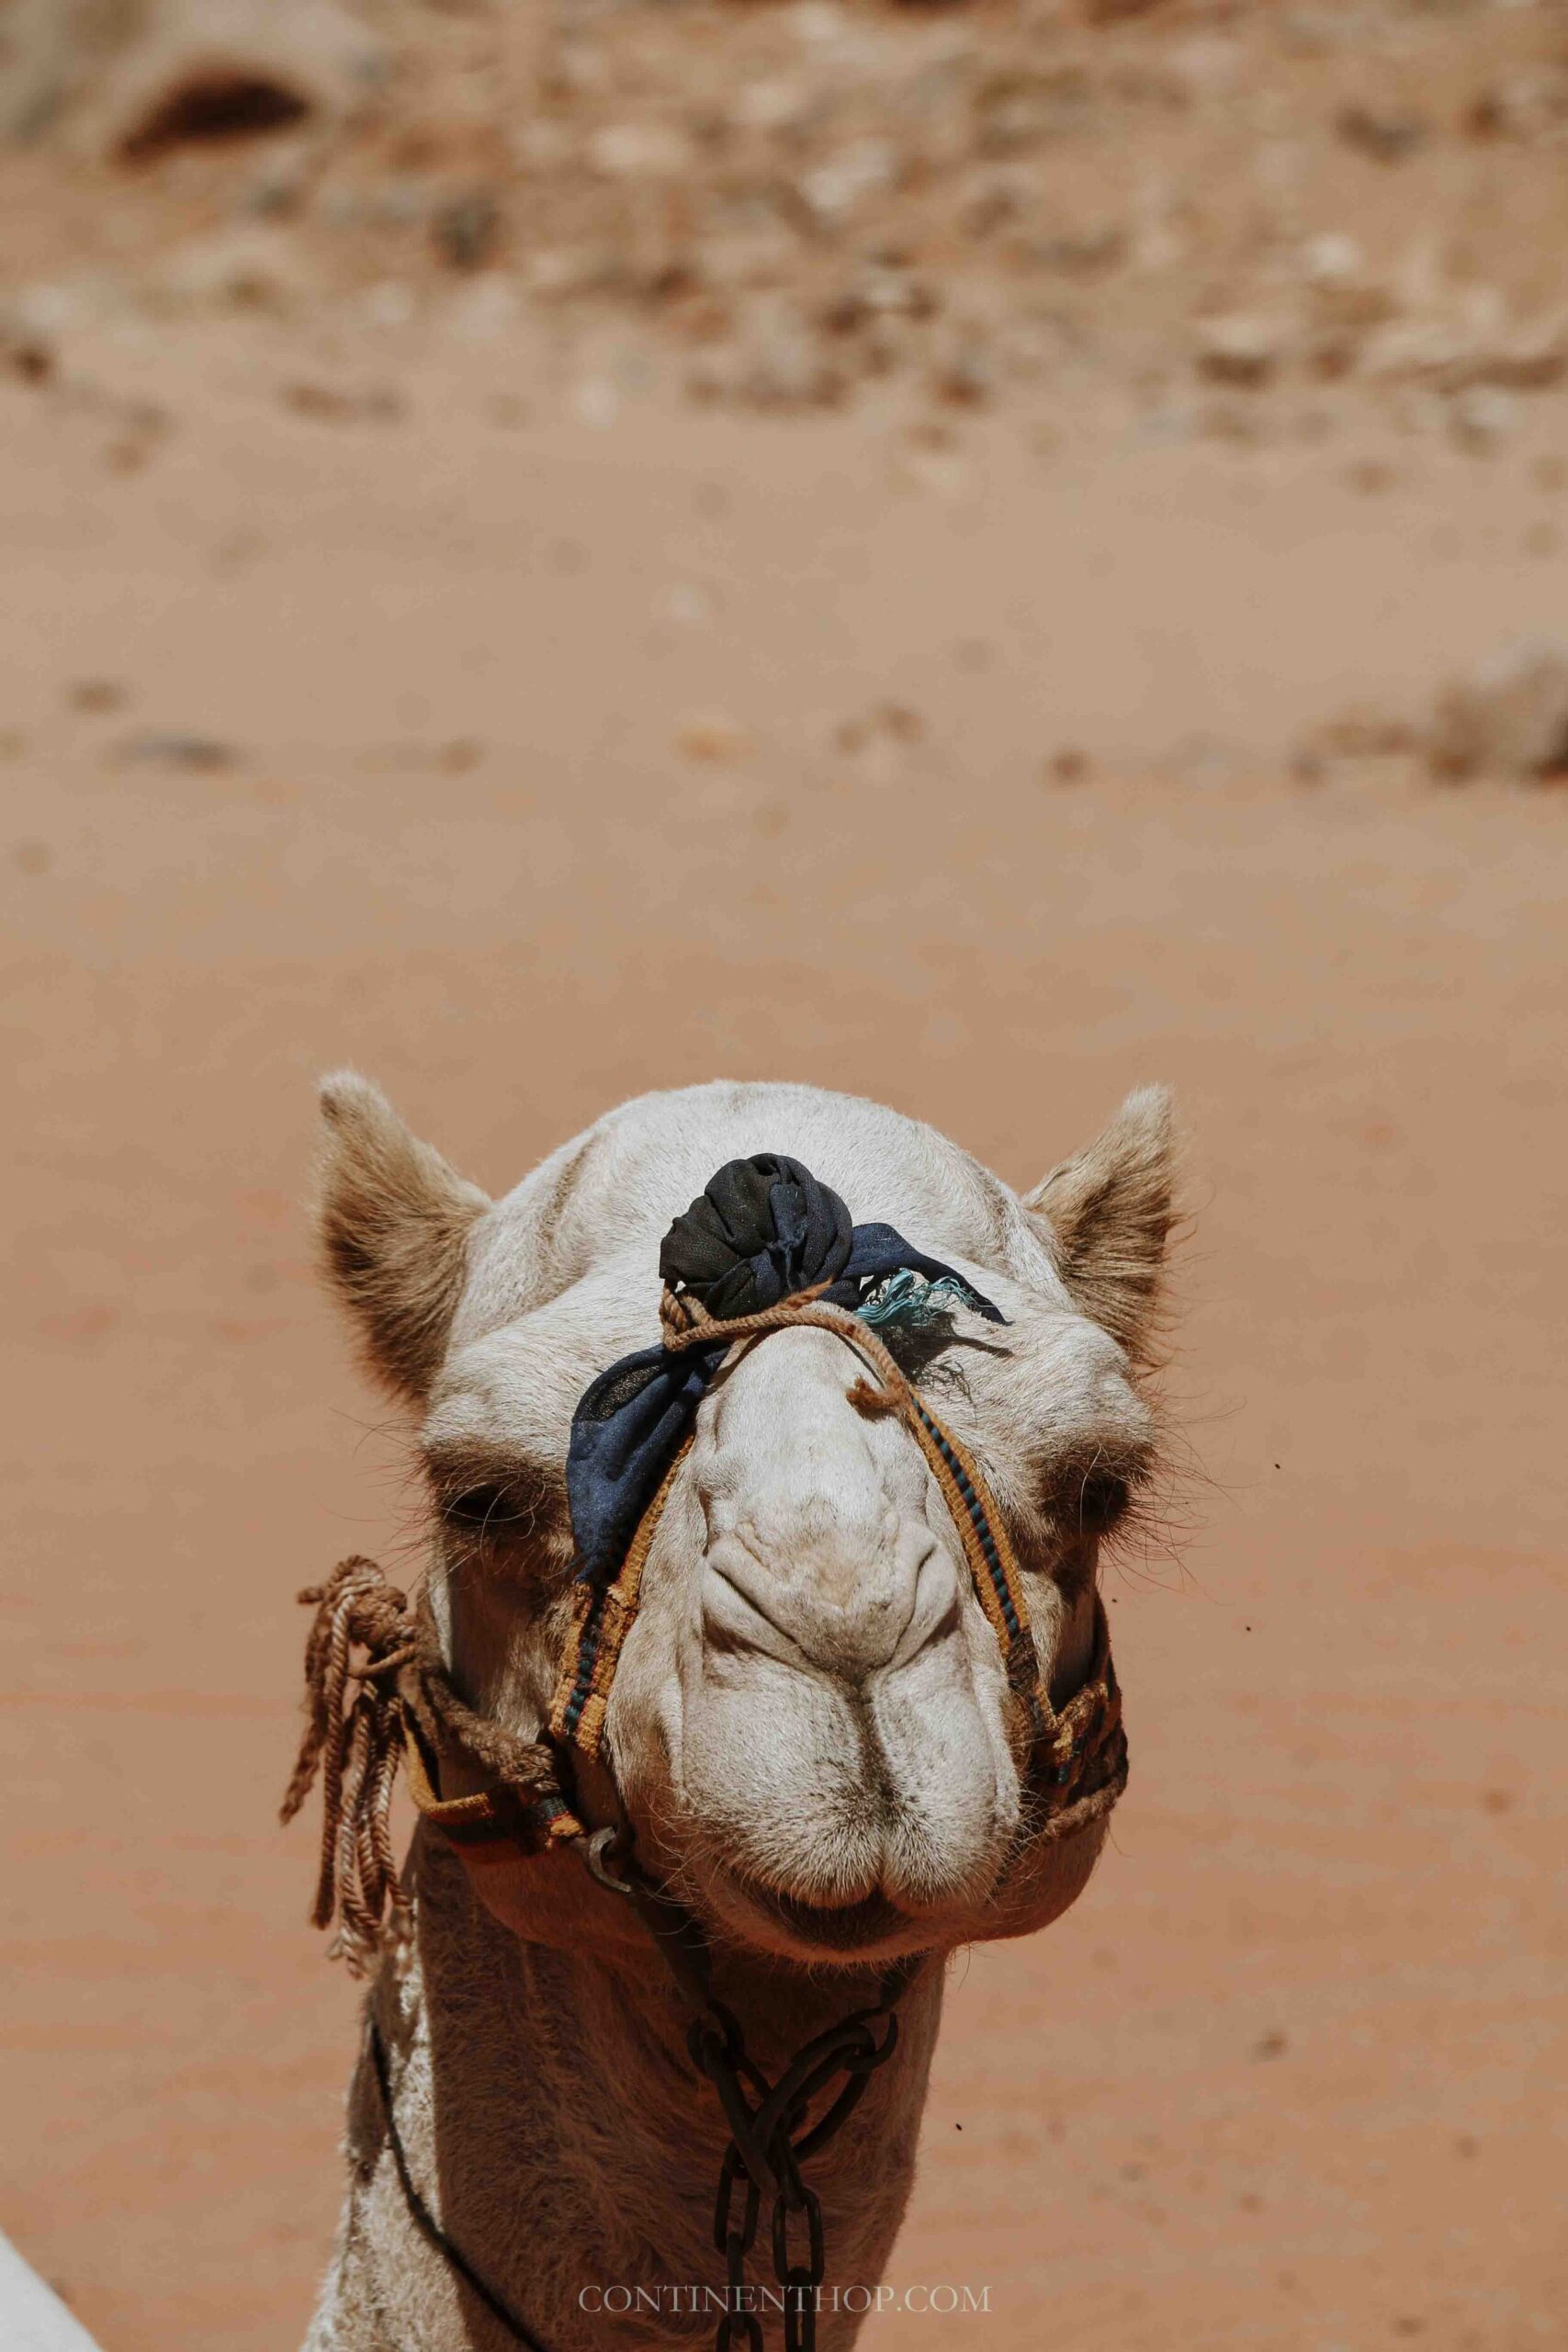 Jordan country image of the face of a camel in Wadi Rum